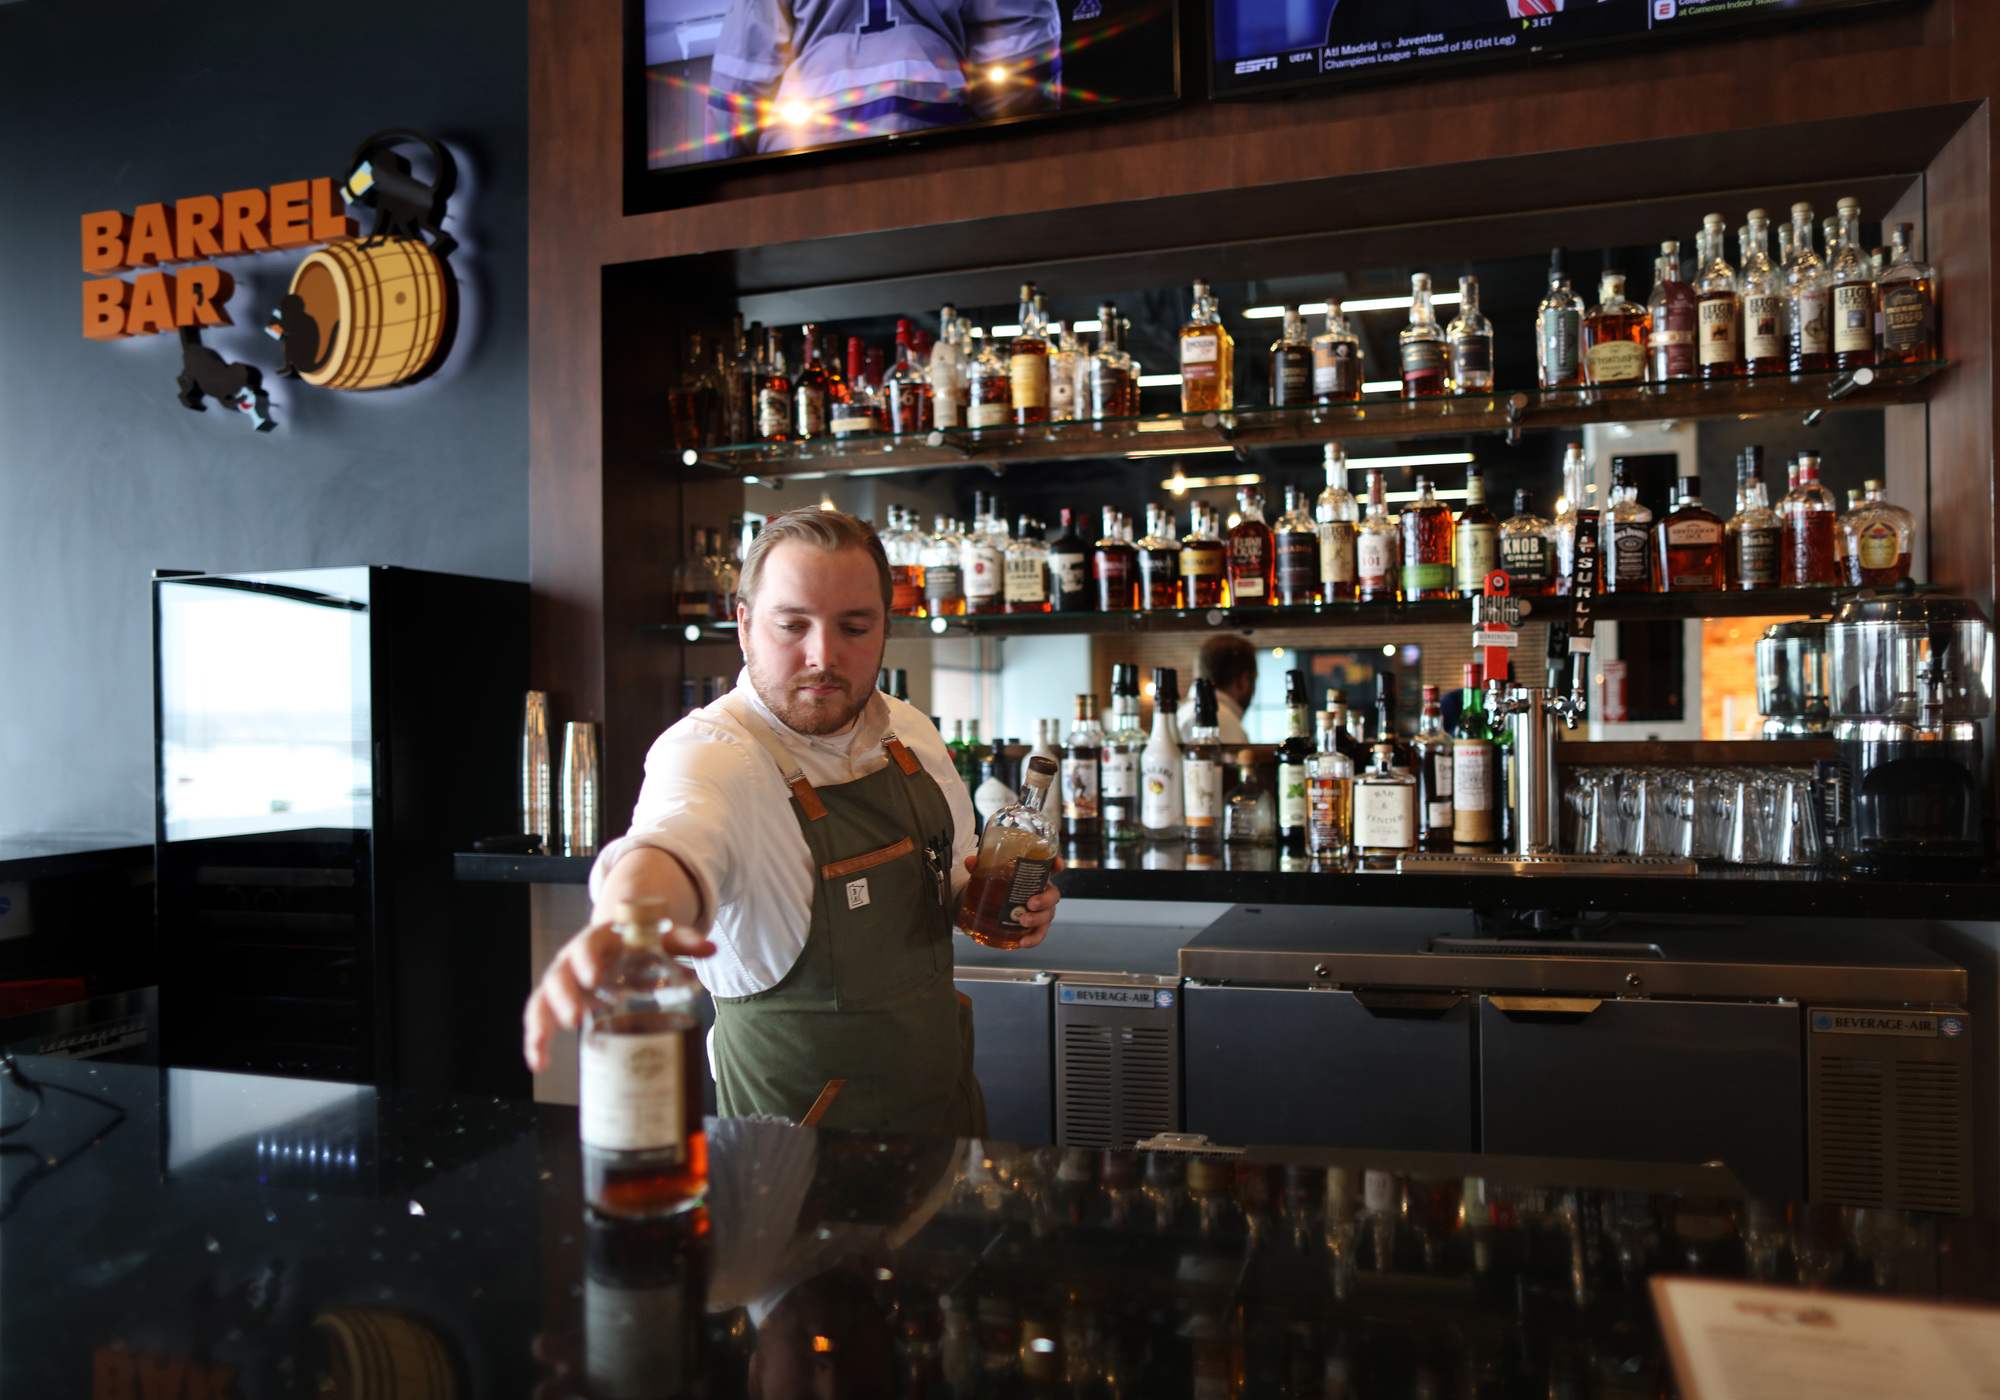 Joseph McGrath tends the Barrel Bar with its extensive whiskey offerings, including several from Minnesota.